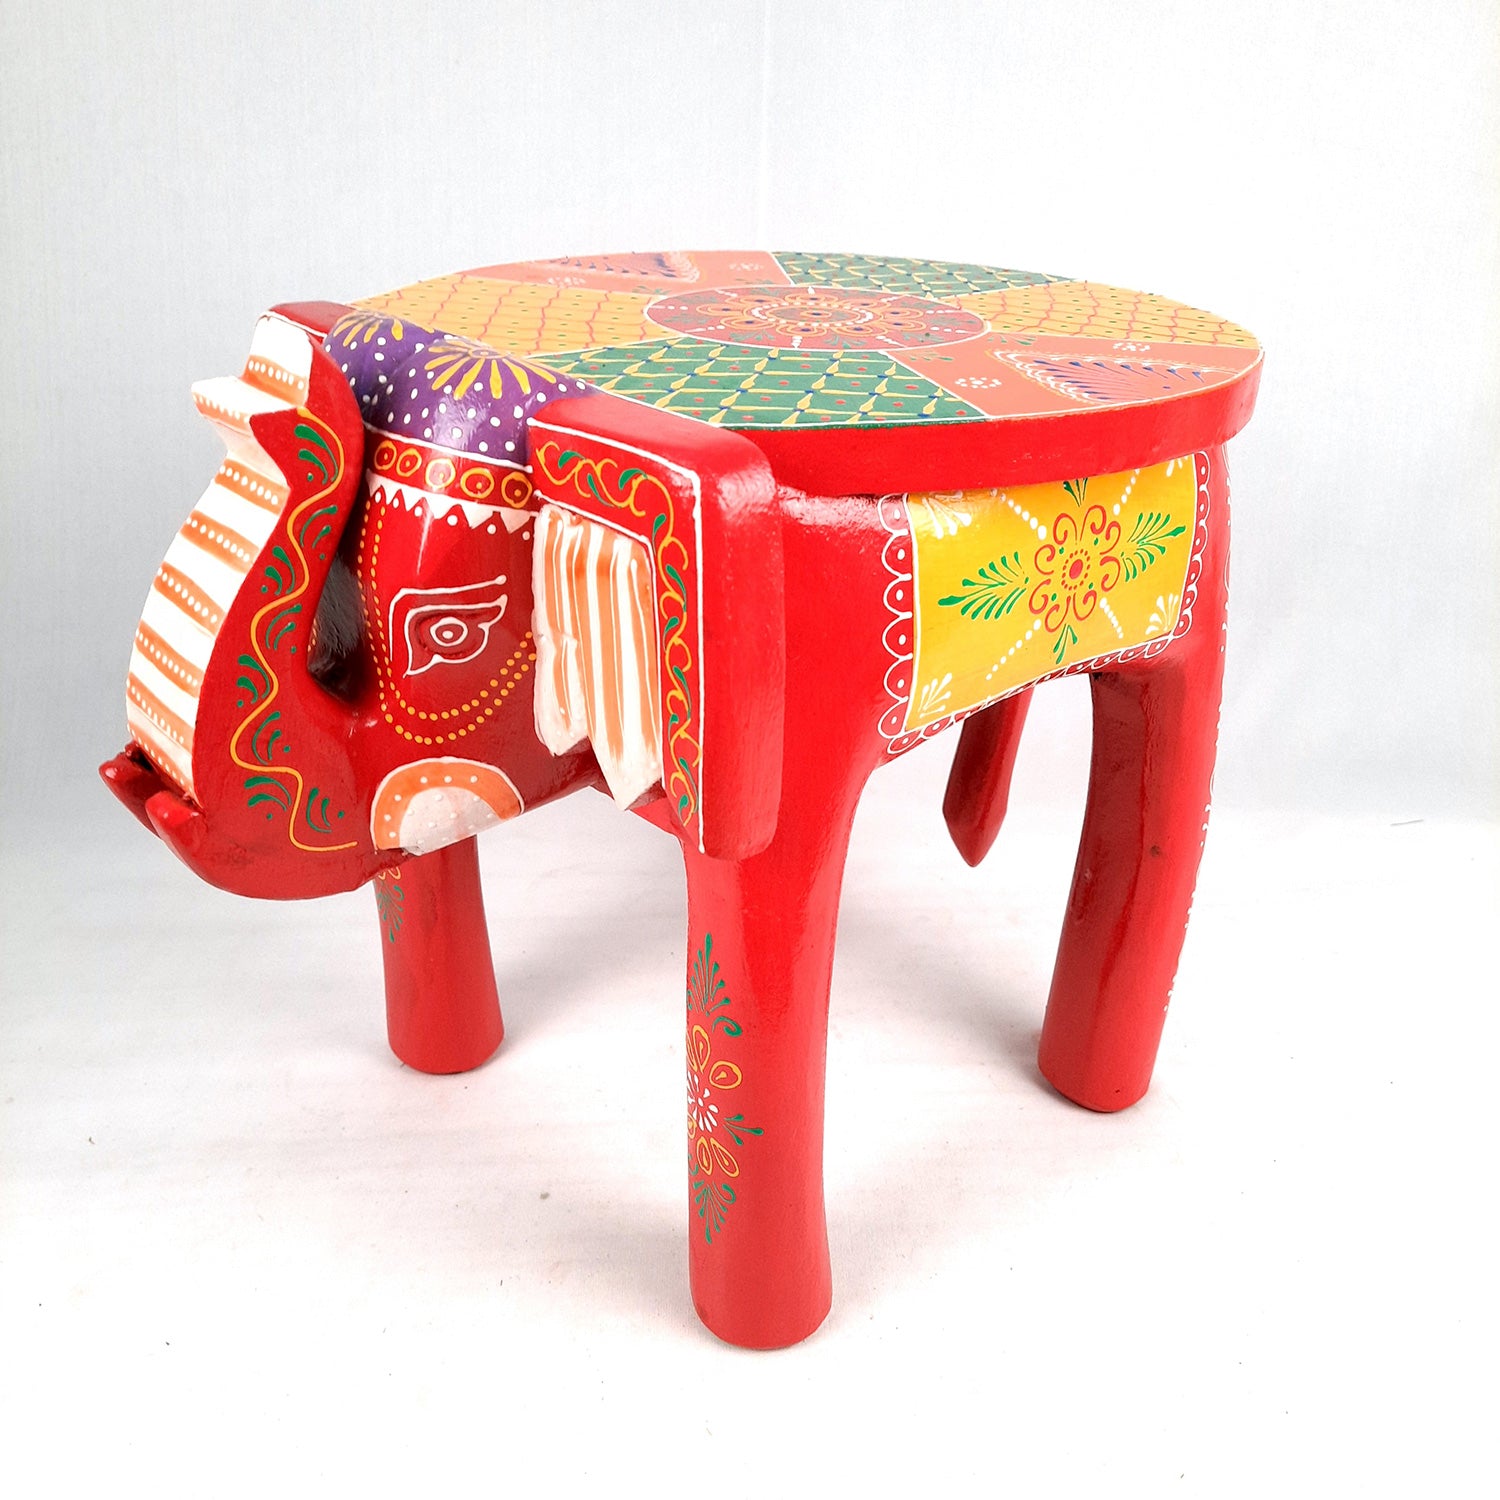 Side Table Cum Stool - Elephant Design | Wooden Small Stools for Keeping Lamp, Vases & Plants - for Home Decor, Corners, Sofa Side, Office & Gifts - 12 Inch - Apkamart